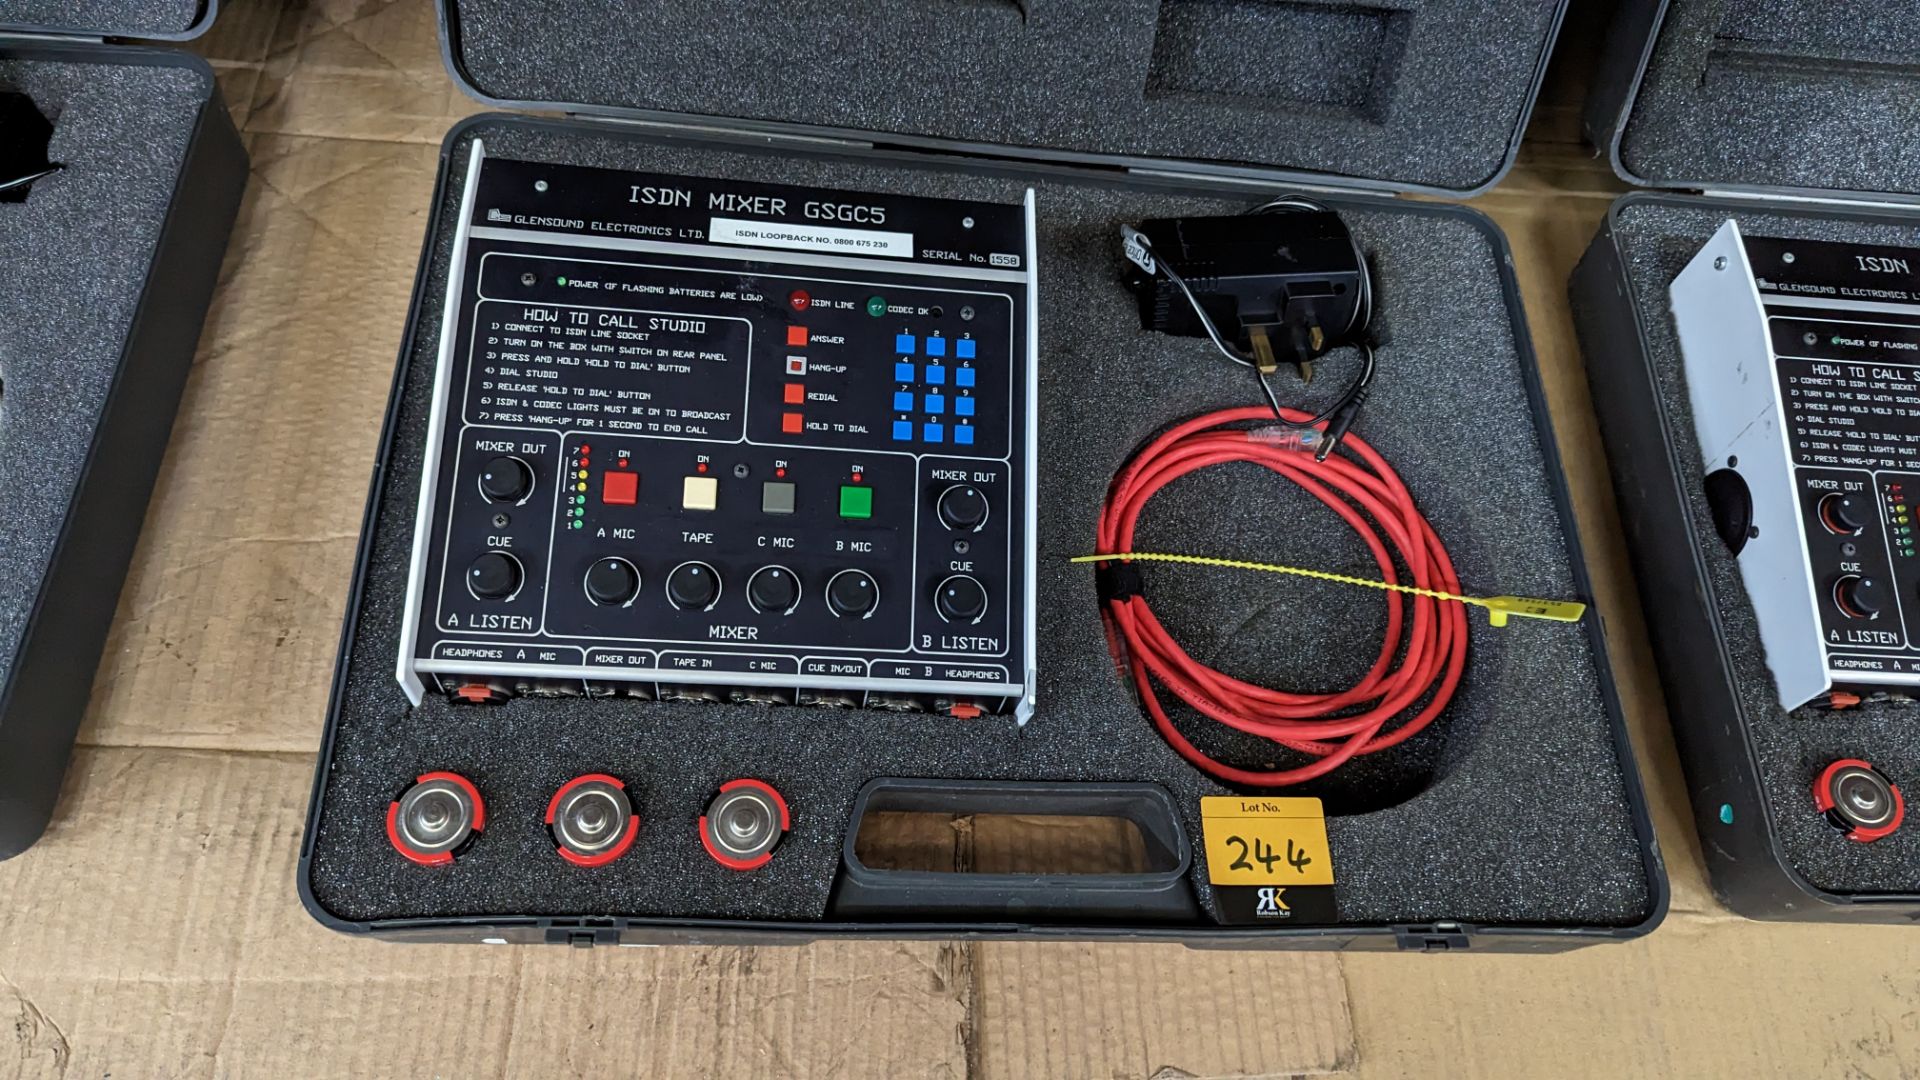 Glensound ISDN mixer, model GSGC5. Includes carry case and ancillaries - Image 4 of 9